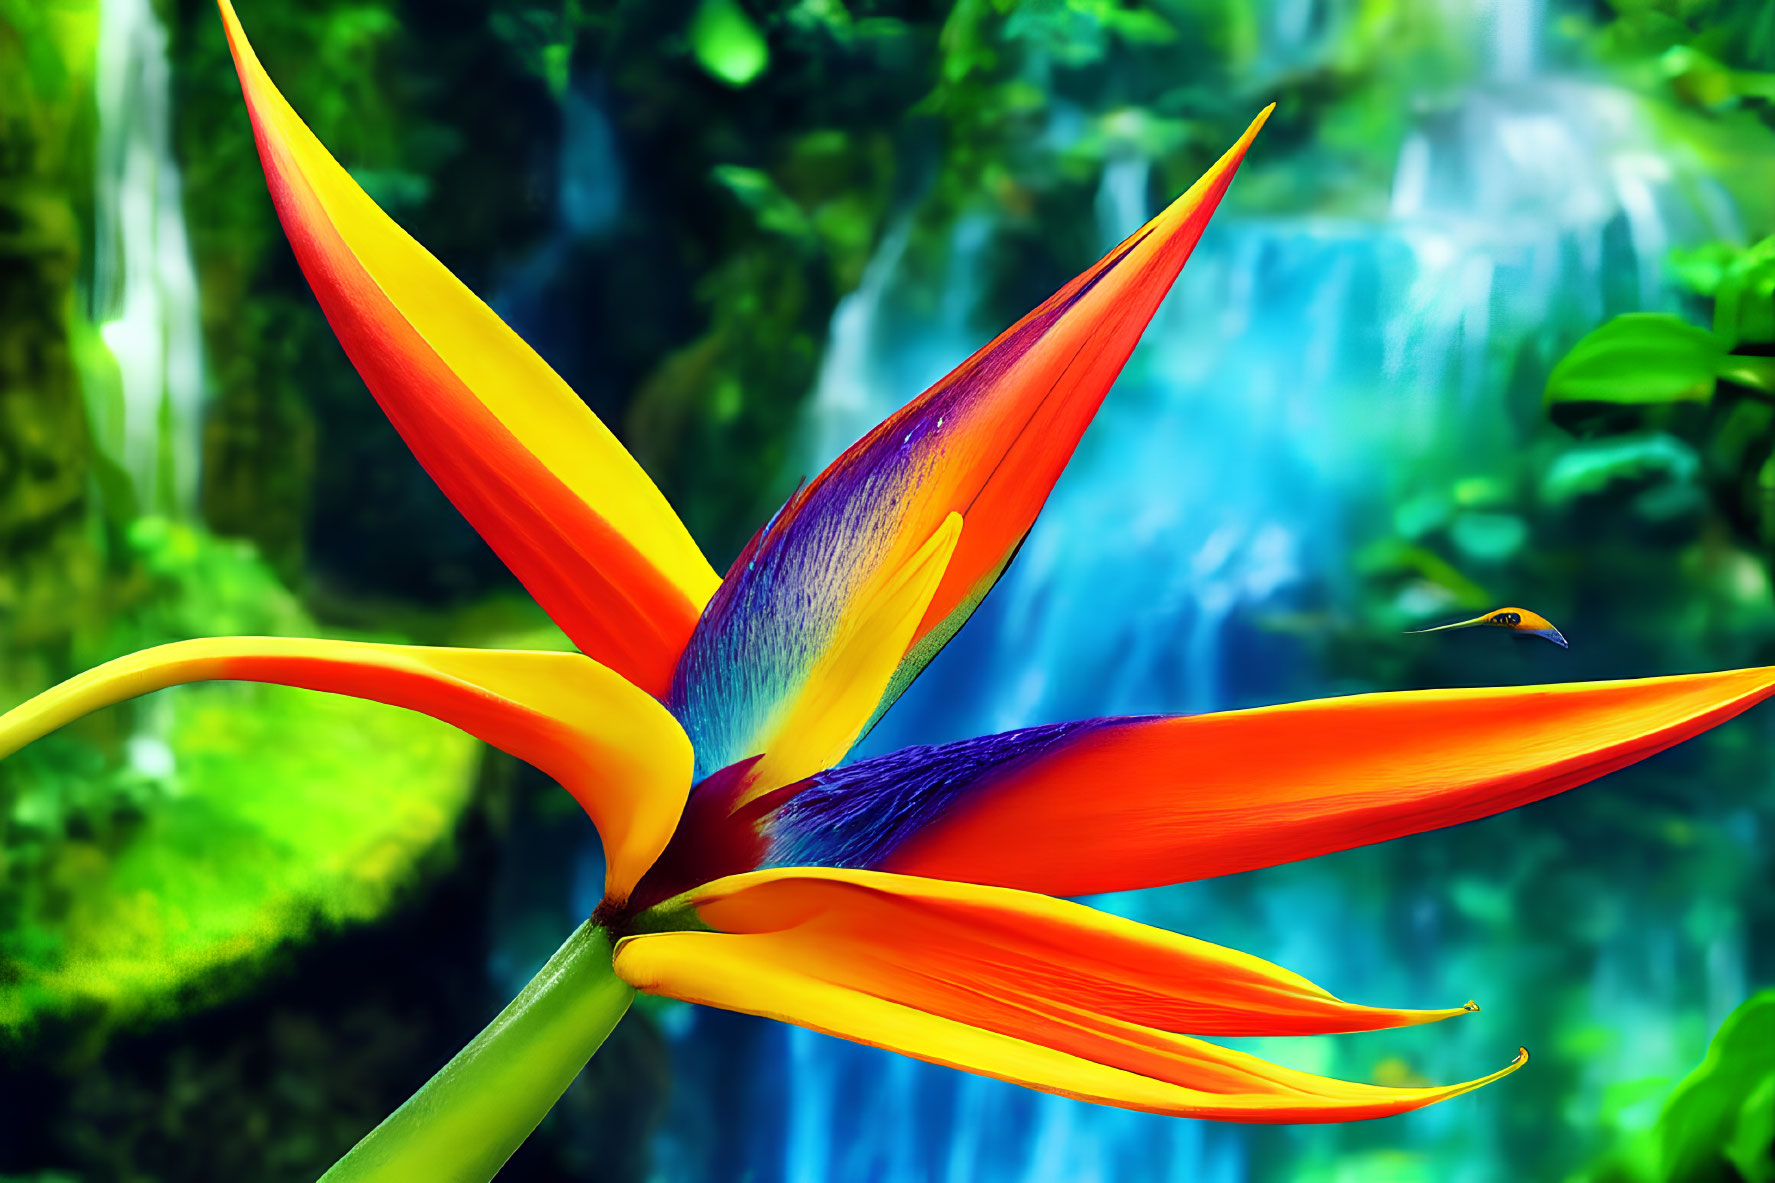 Colorful Bird of Paradise Flower with Orange, Blue, and Purple Hues on Waterfall Backdrop